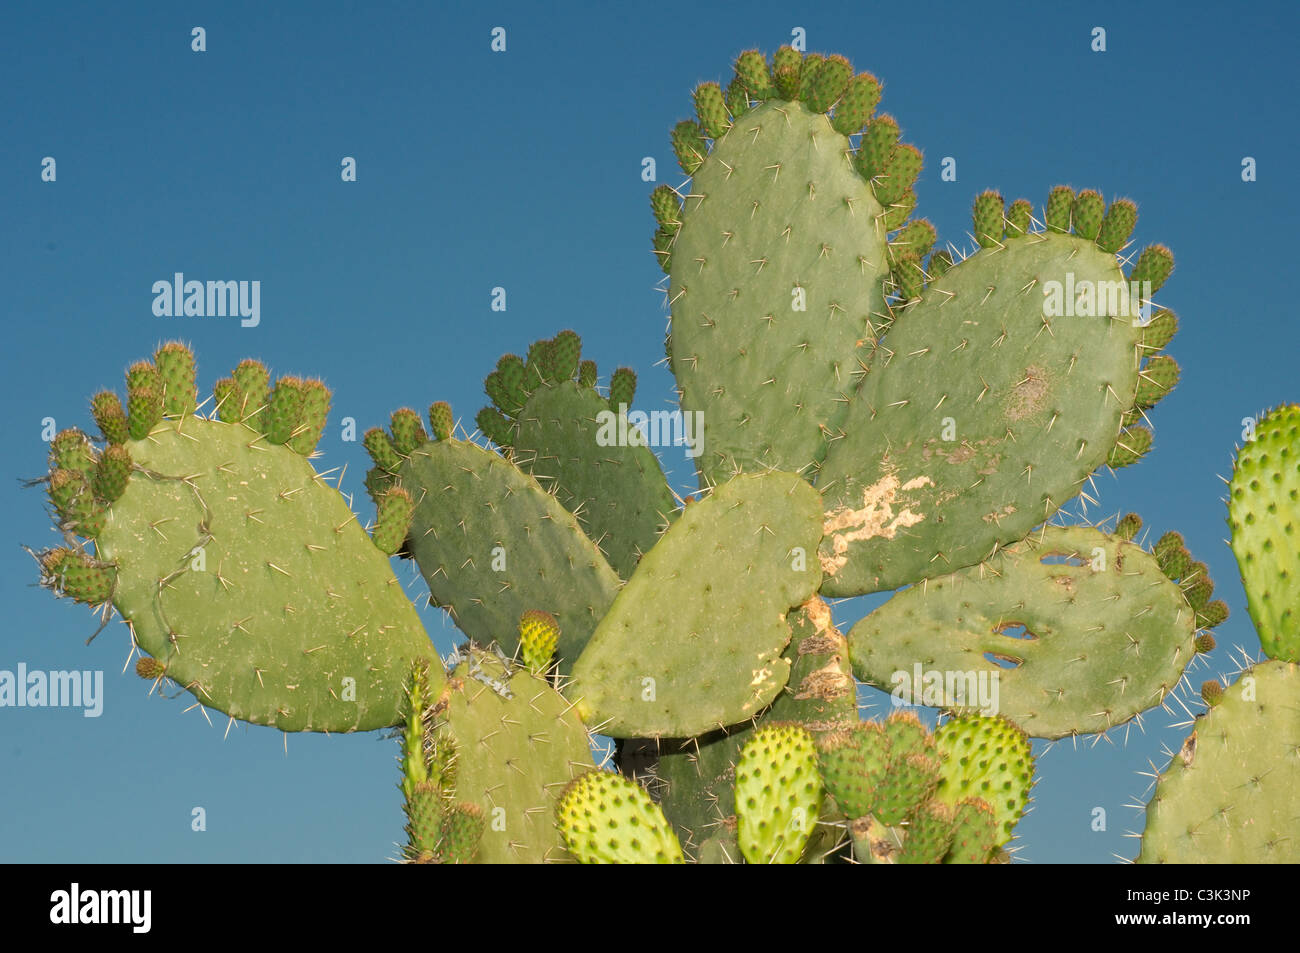 Indian fig opuntia, Barbary fig, or Prickly pear (Opuntia ficus-indica) with ripe fruits, Tunis, Africa Stock Photo